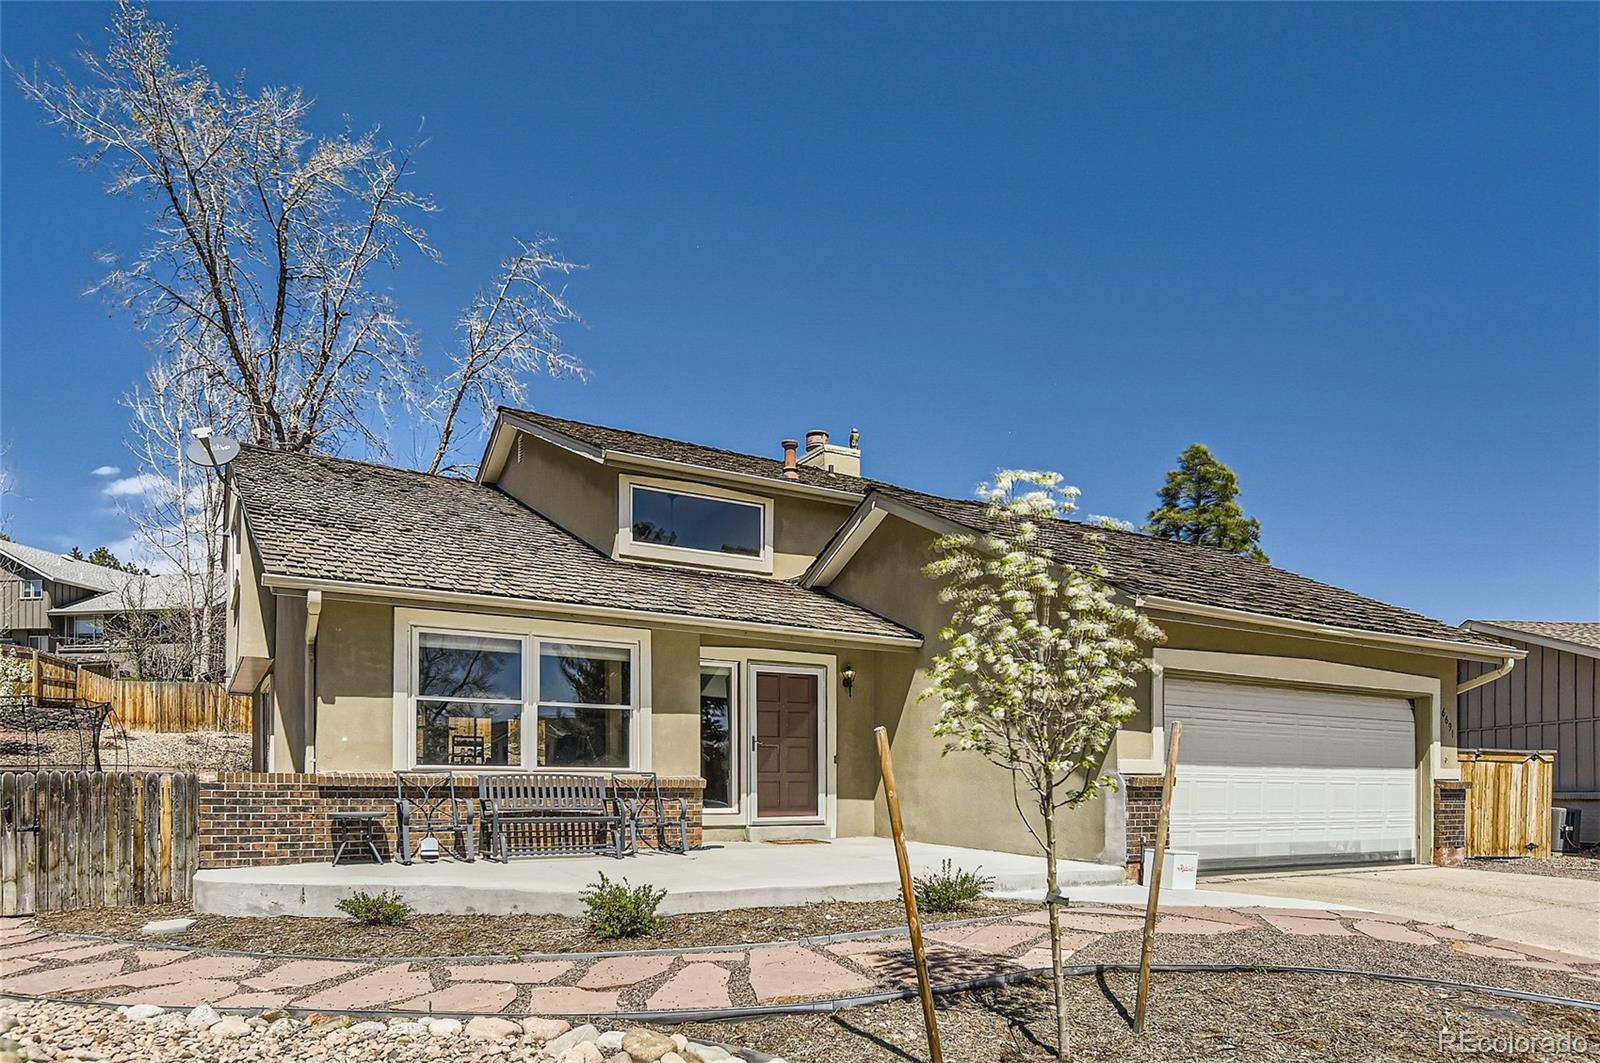 6691 e euclid place, Centennial sold home. Closed on 2024-05-24 for $802,500.